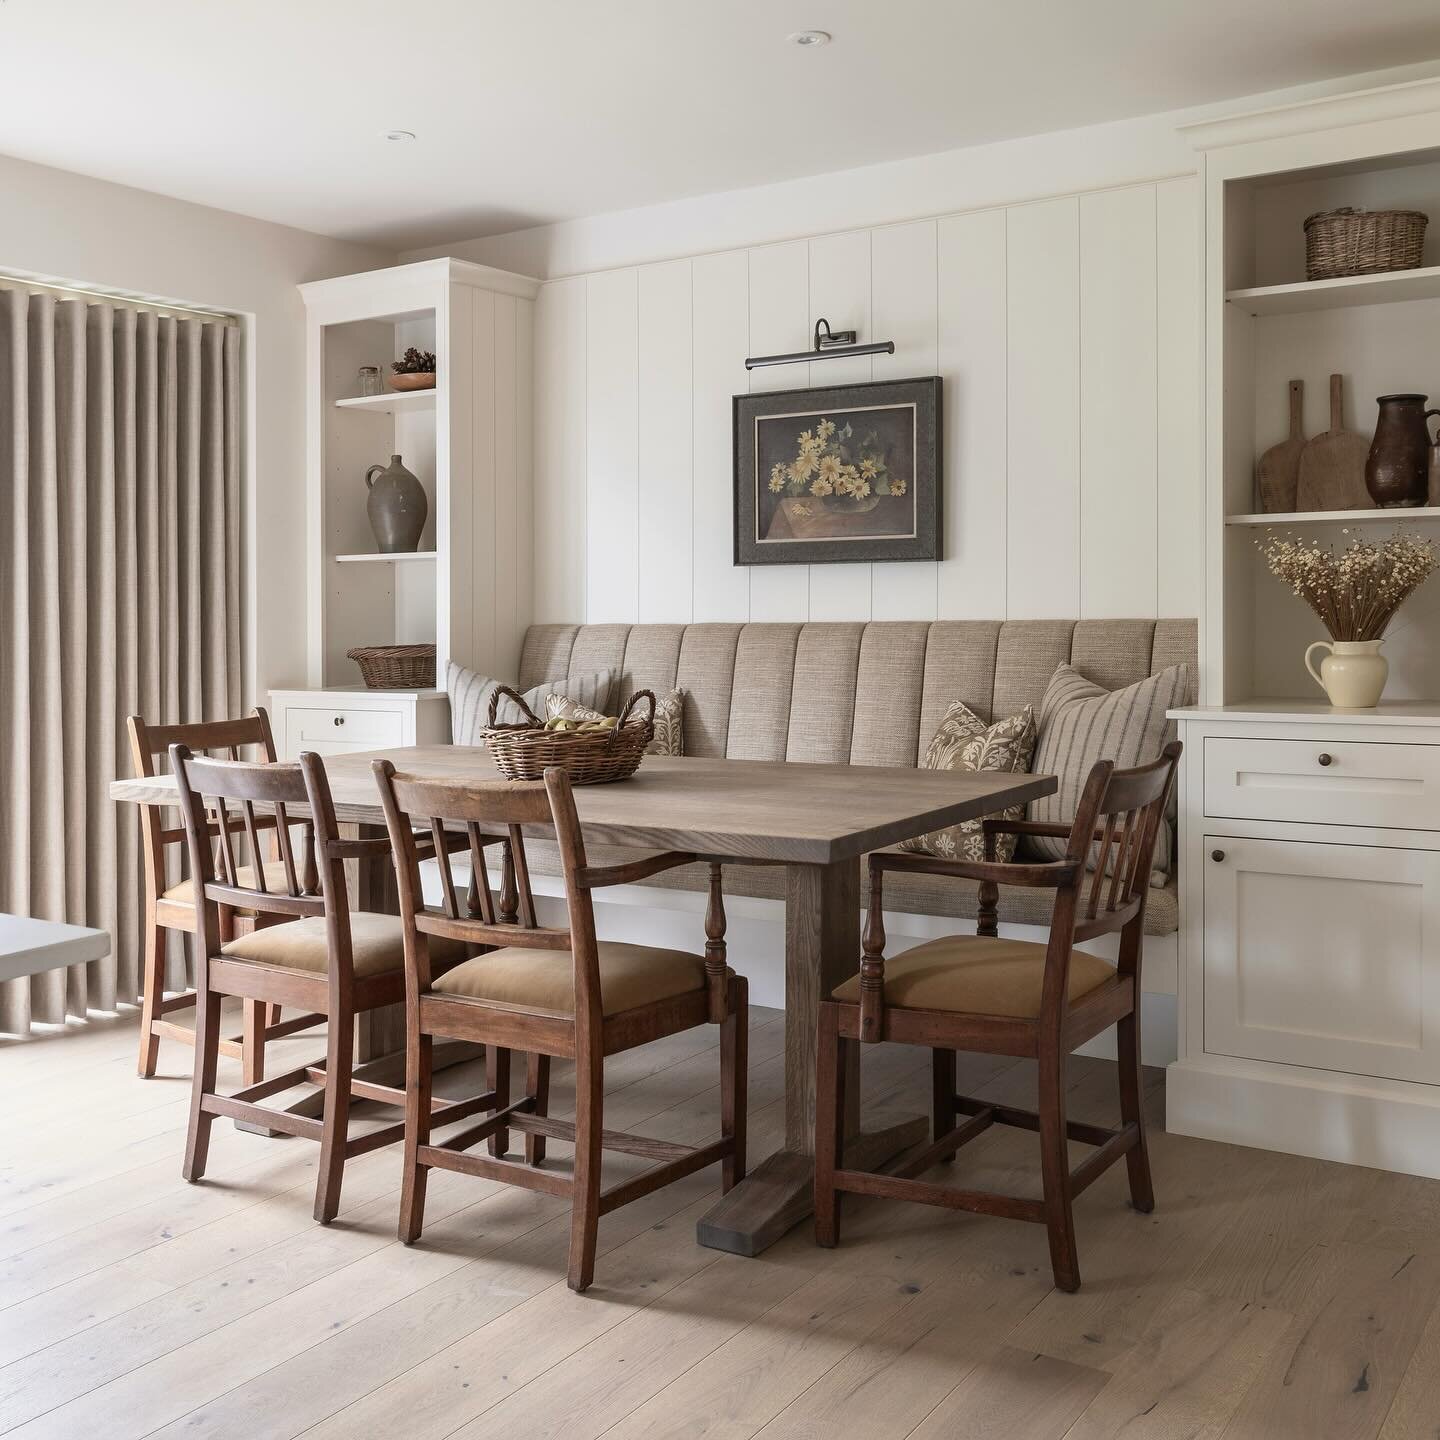 The perfect weekend spot ☕️ We loved designing this space, which began with our client&rsquo;s antique painting we had re-framed and was complemented by the beautifully recovered George III style chairs in a soft ochre velvet.

Full project portfolio